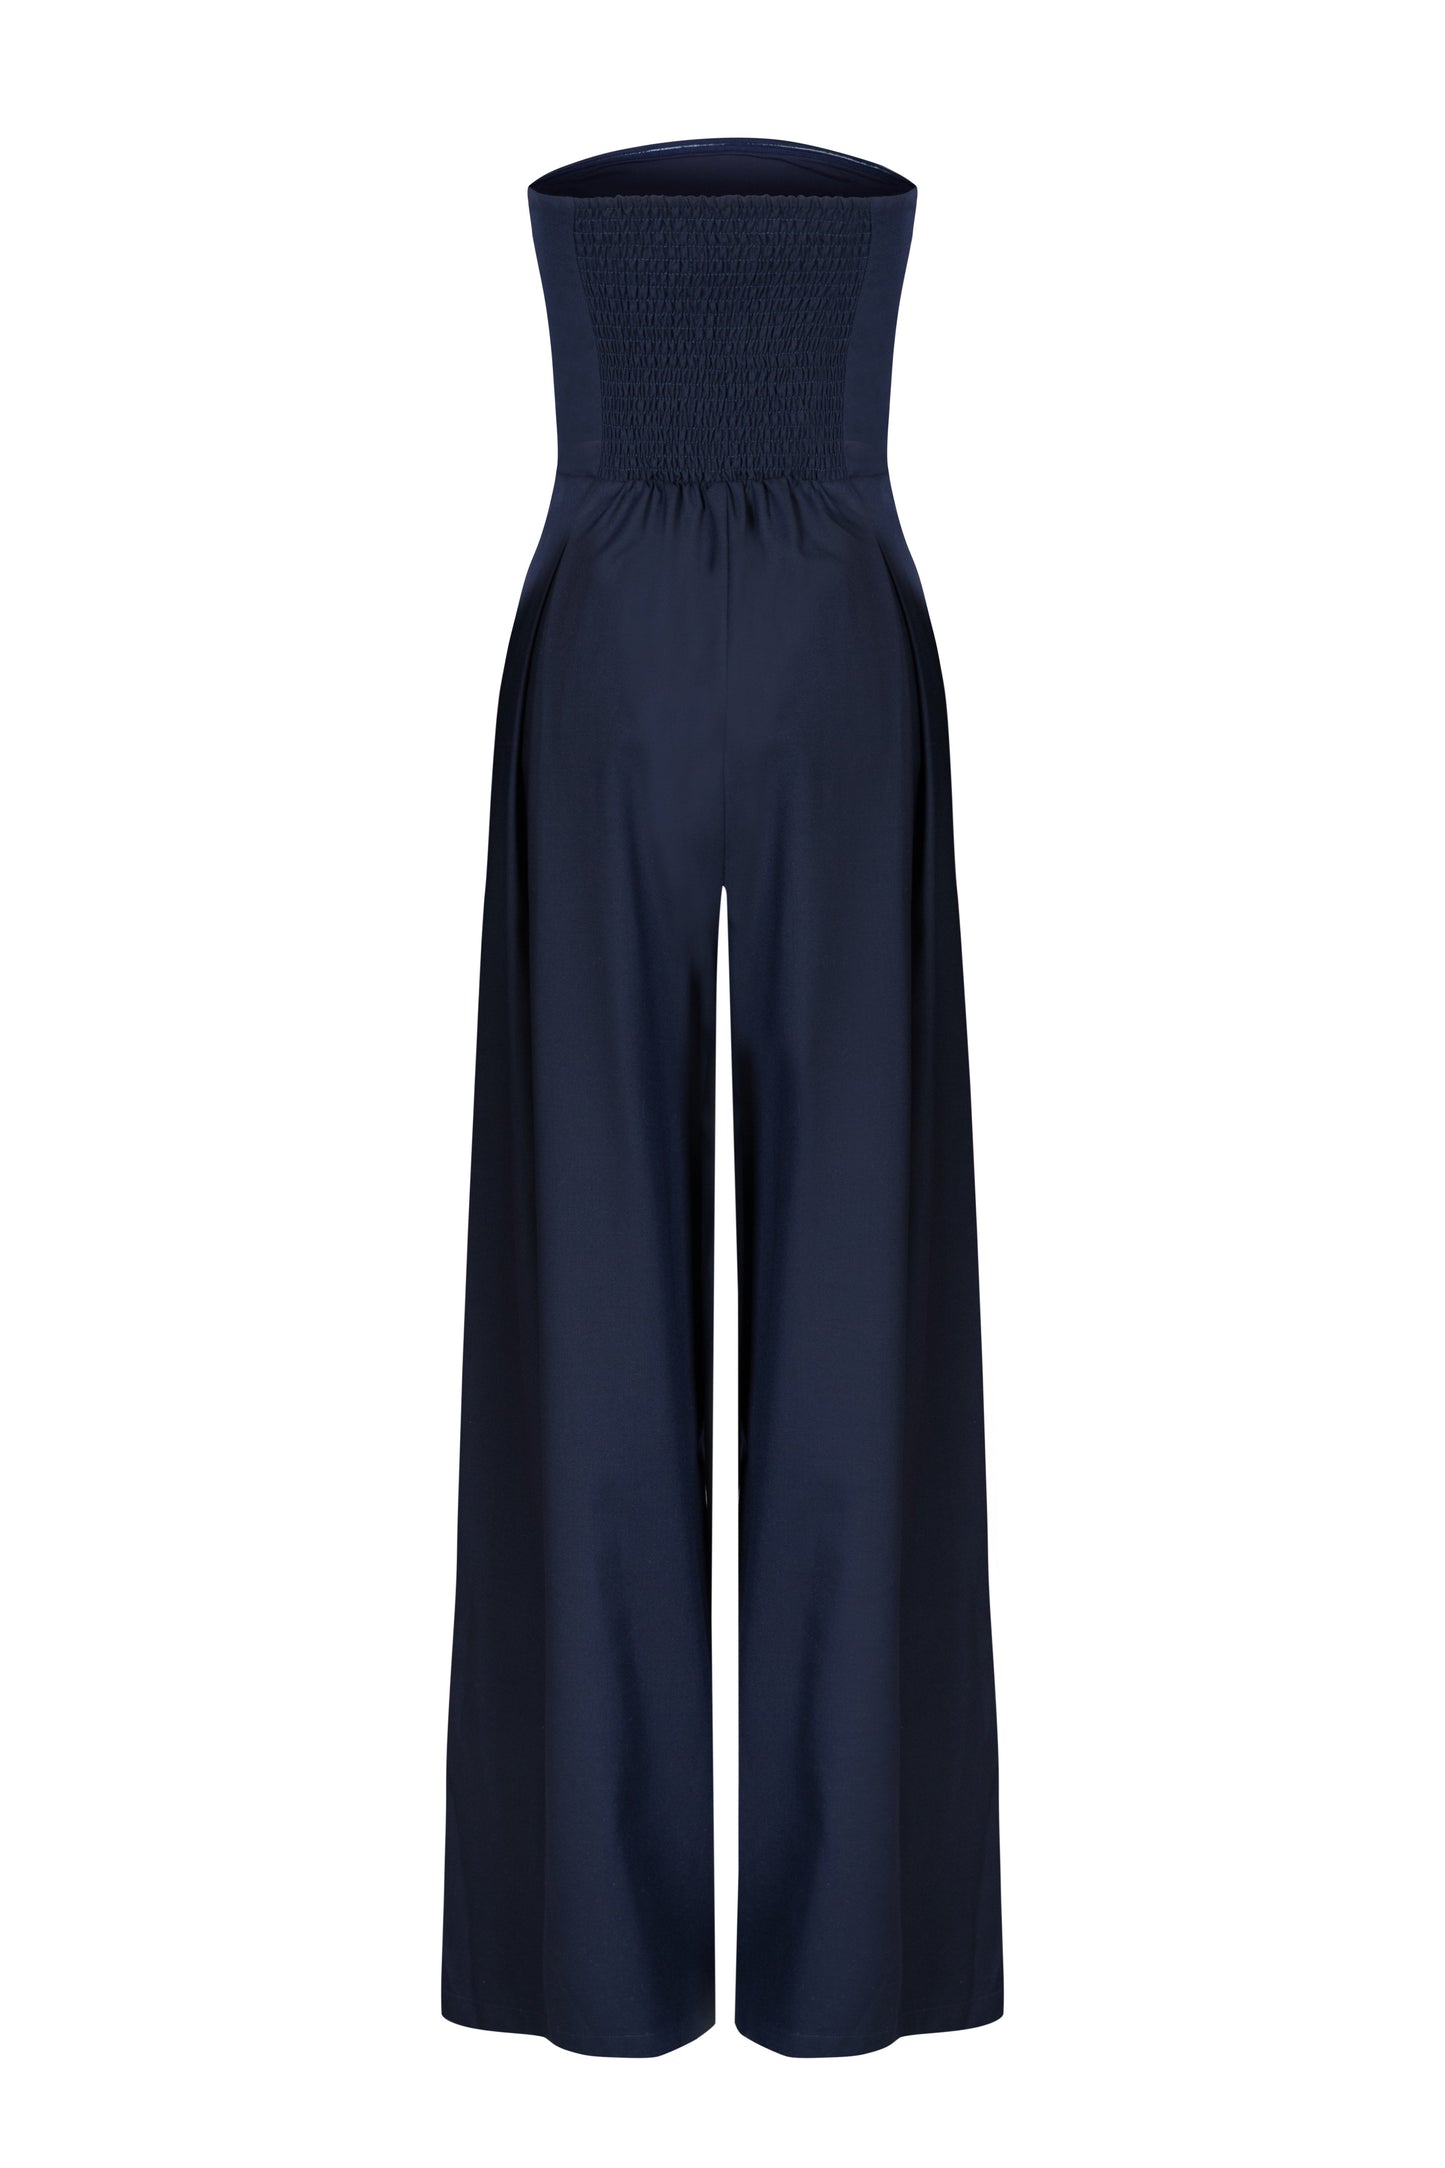 'NYVES URO' JUMPSUIT - NAVY WOOL BLEND